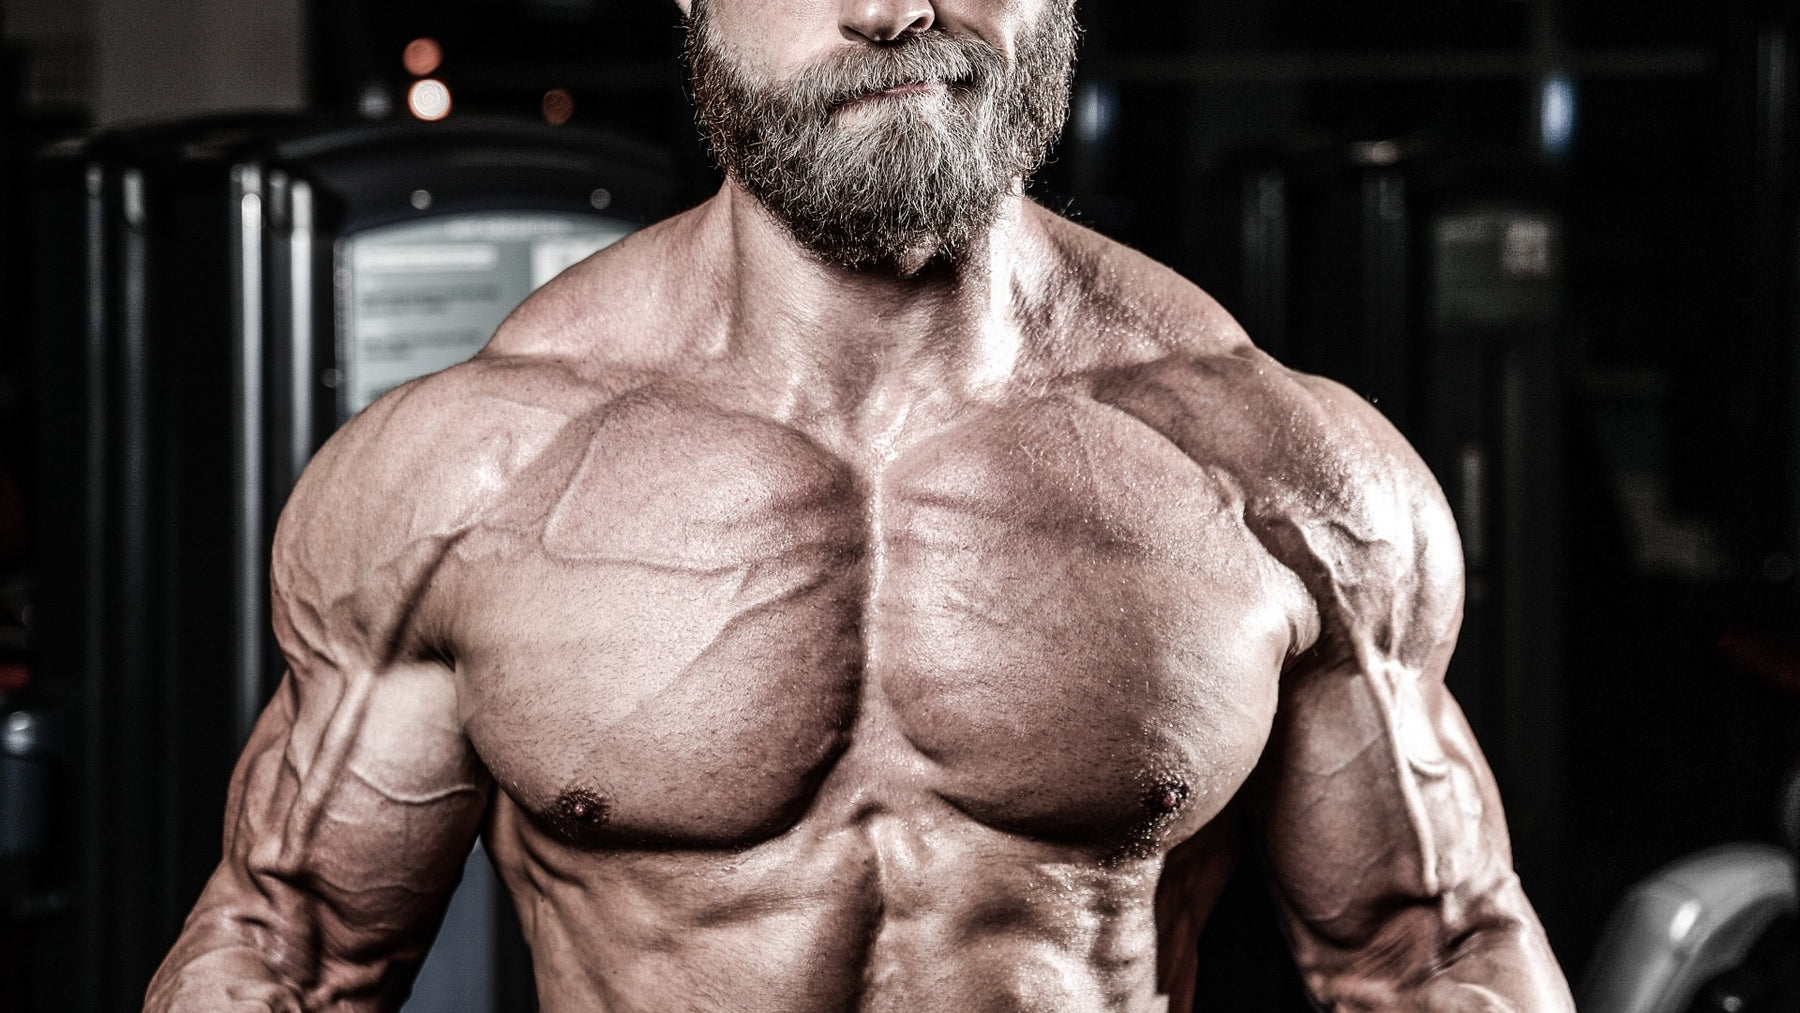 How to Gain Muscle Mass: 5 Must-Have Training Principles